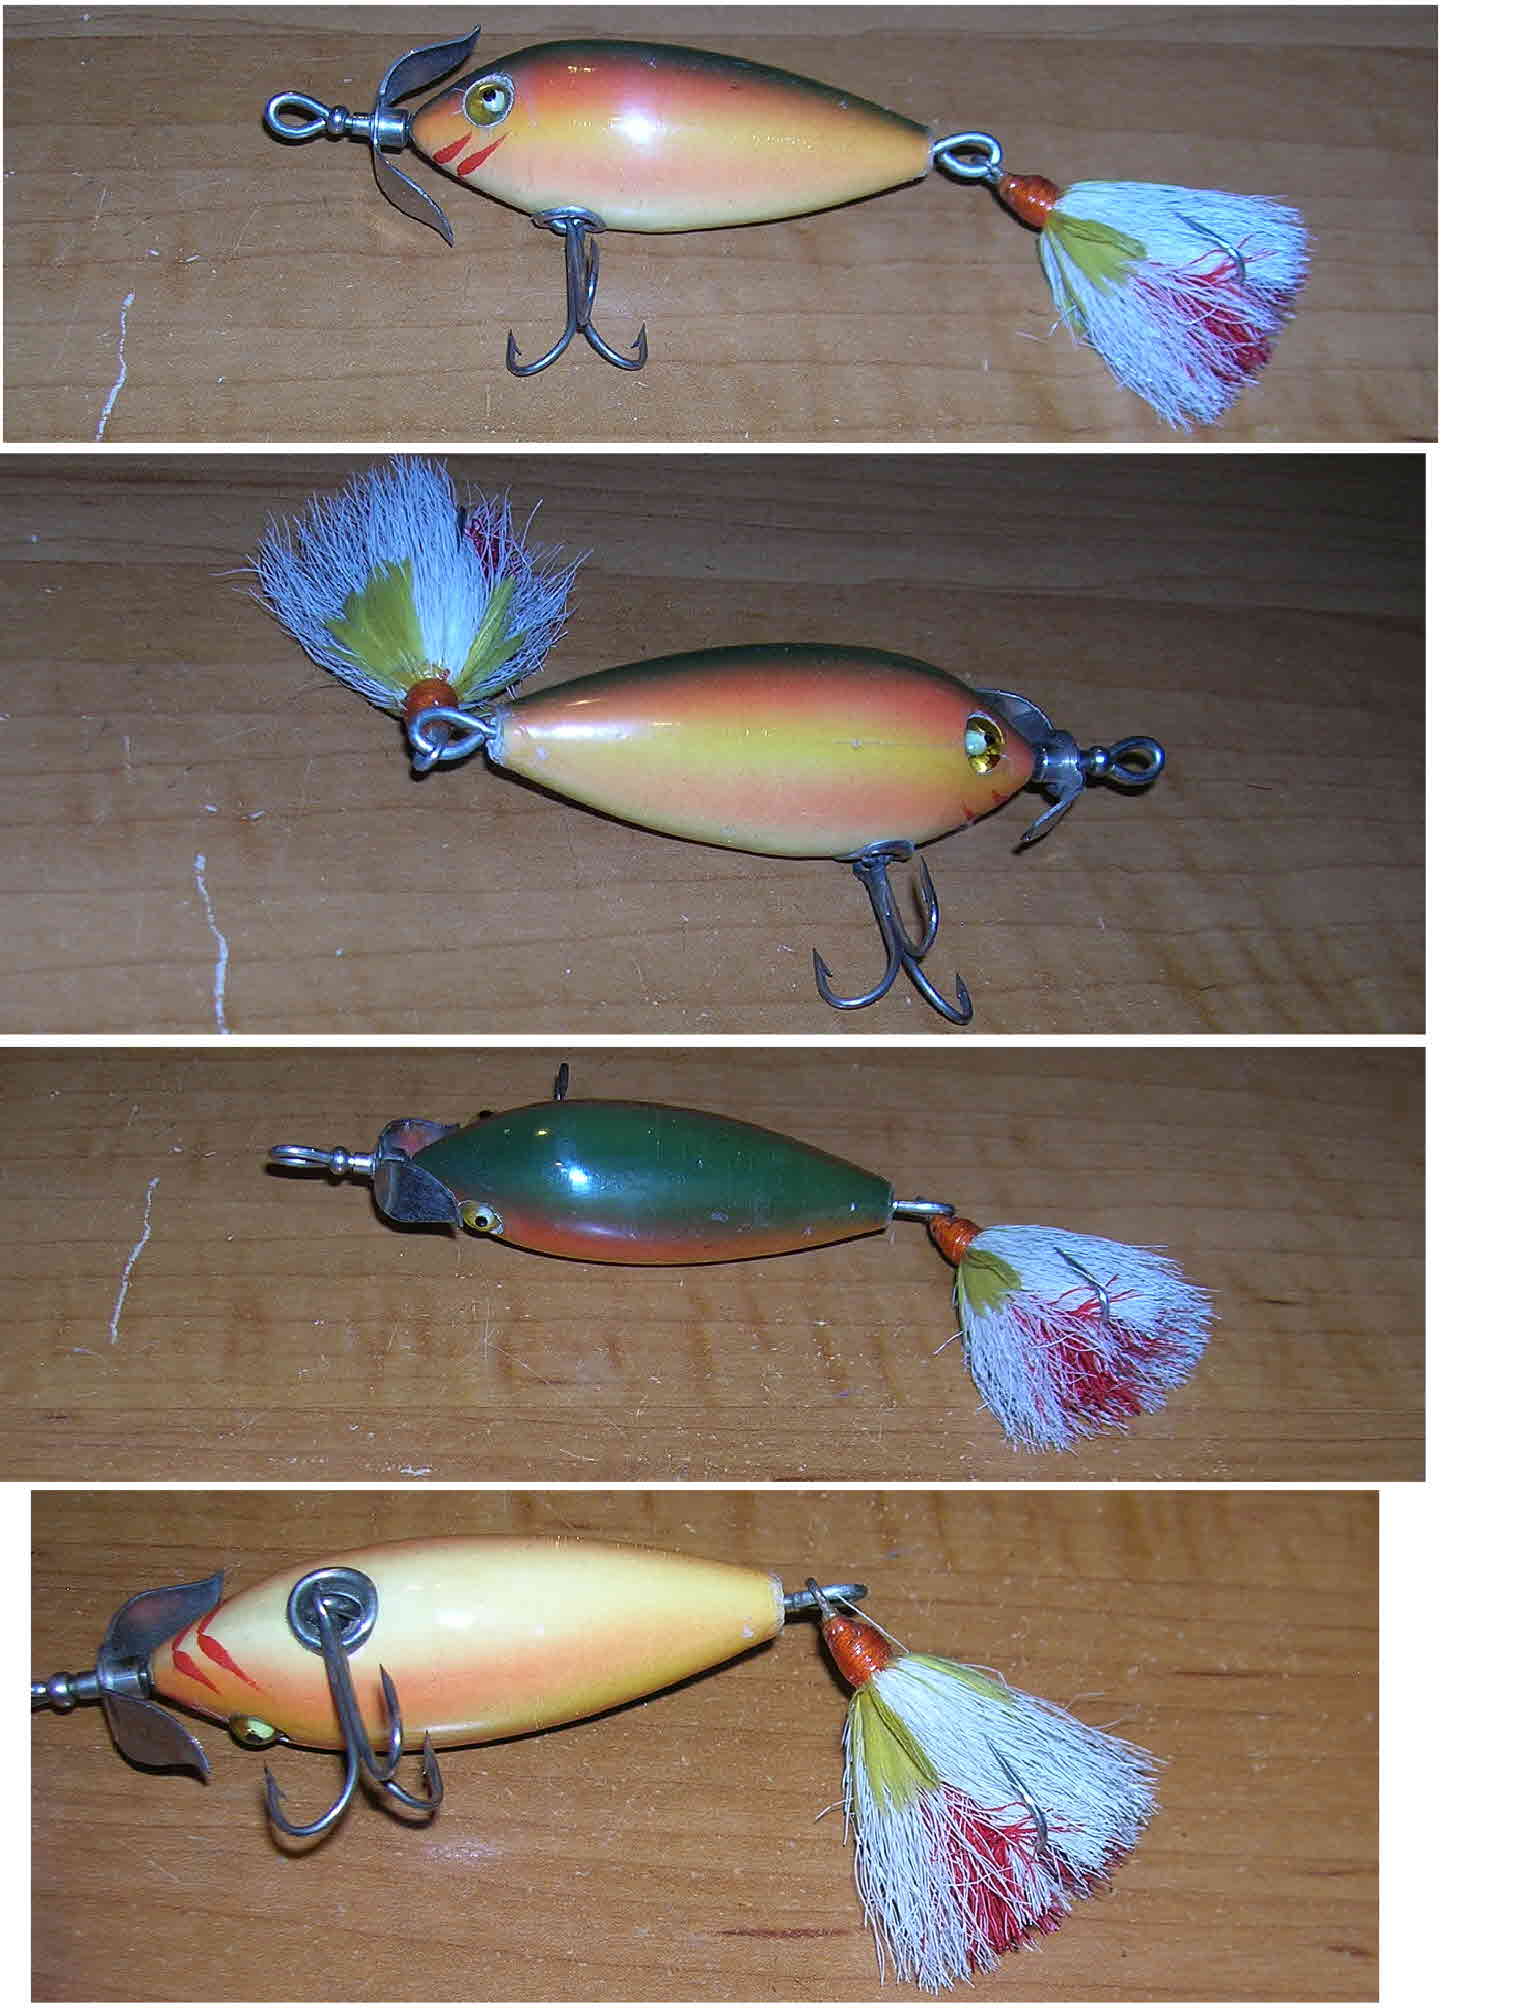 Heddon Gamefisher Lure  Antique fishing lures, Fishing lures, Fly